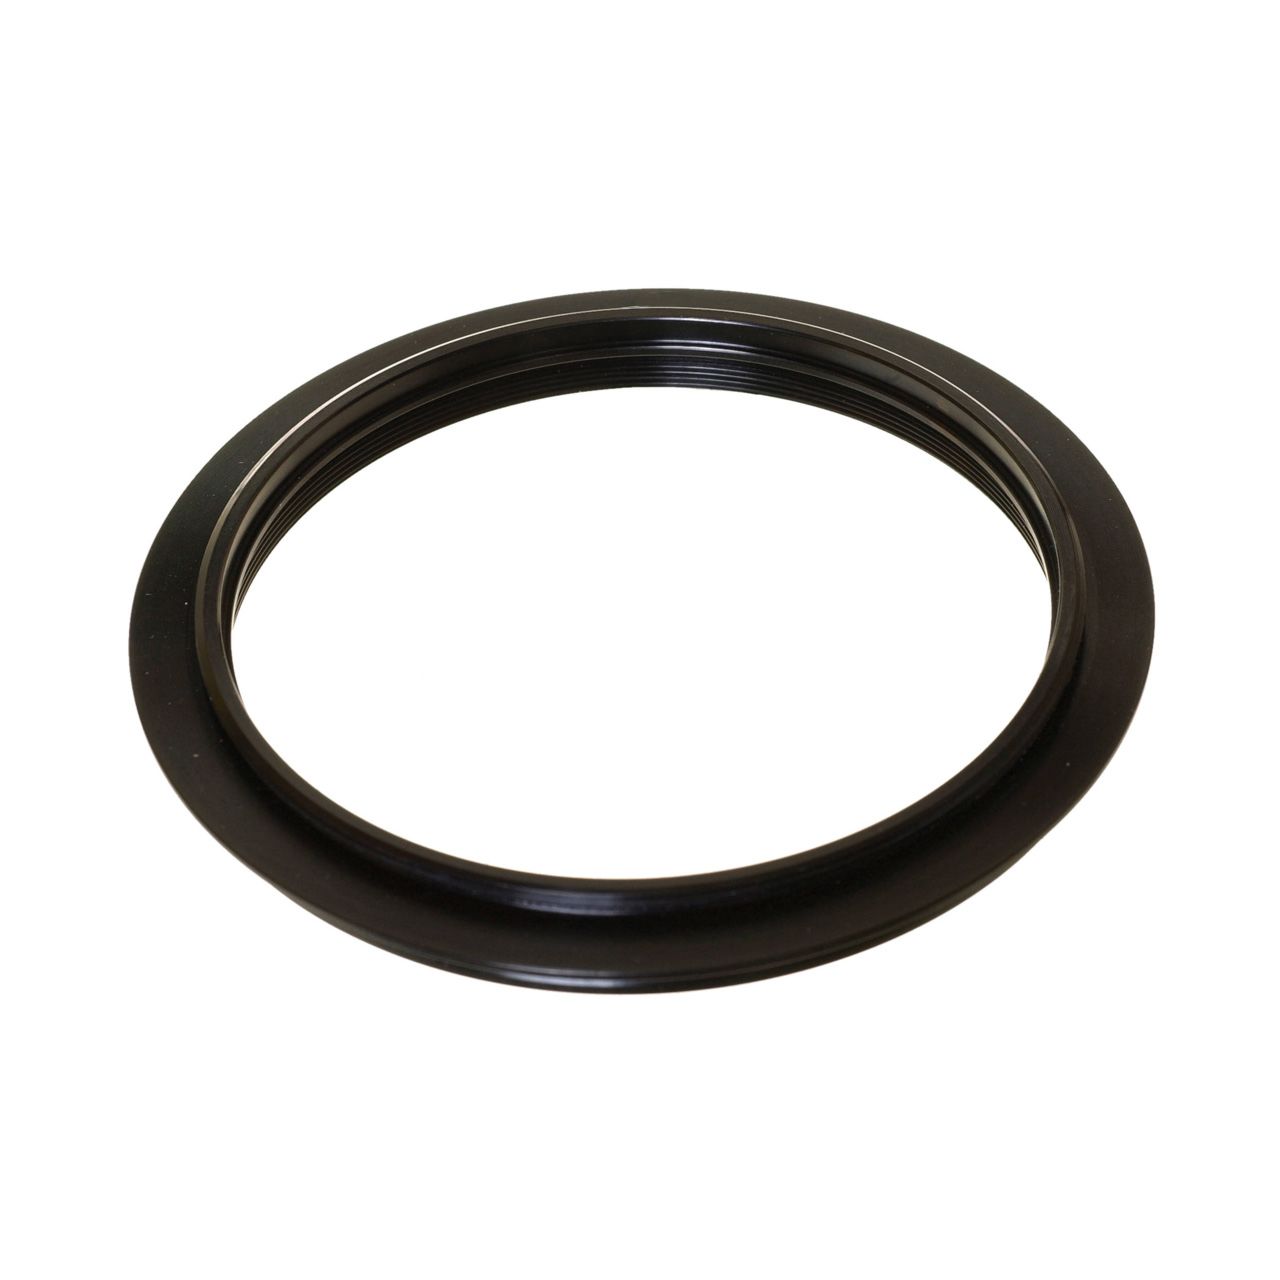 LEE Filters Adapter Ring for Foundation Kit 86Mm